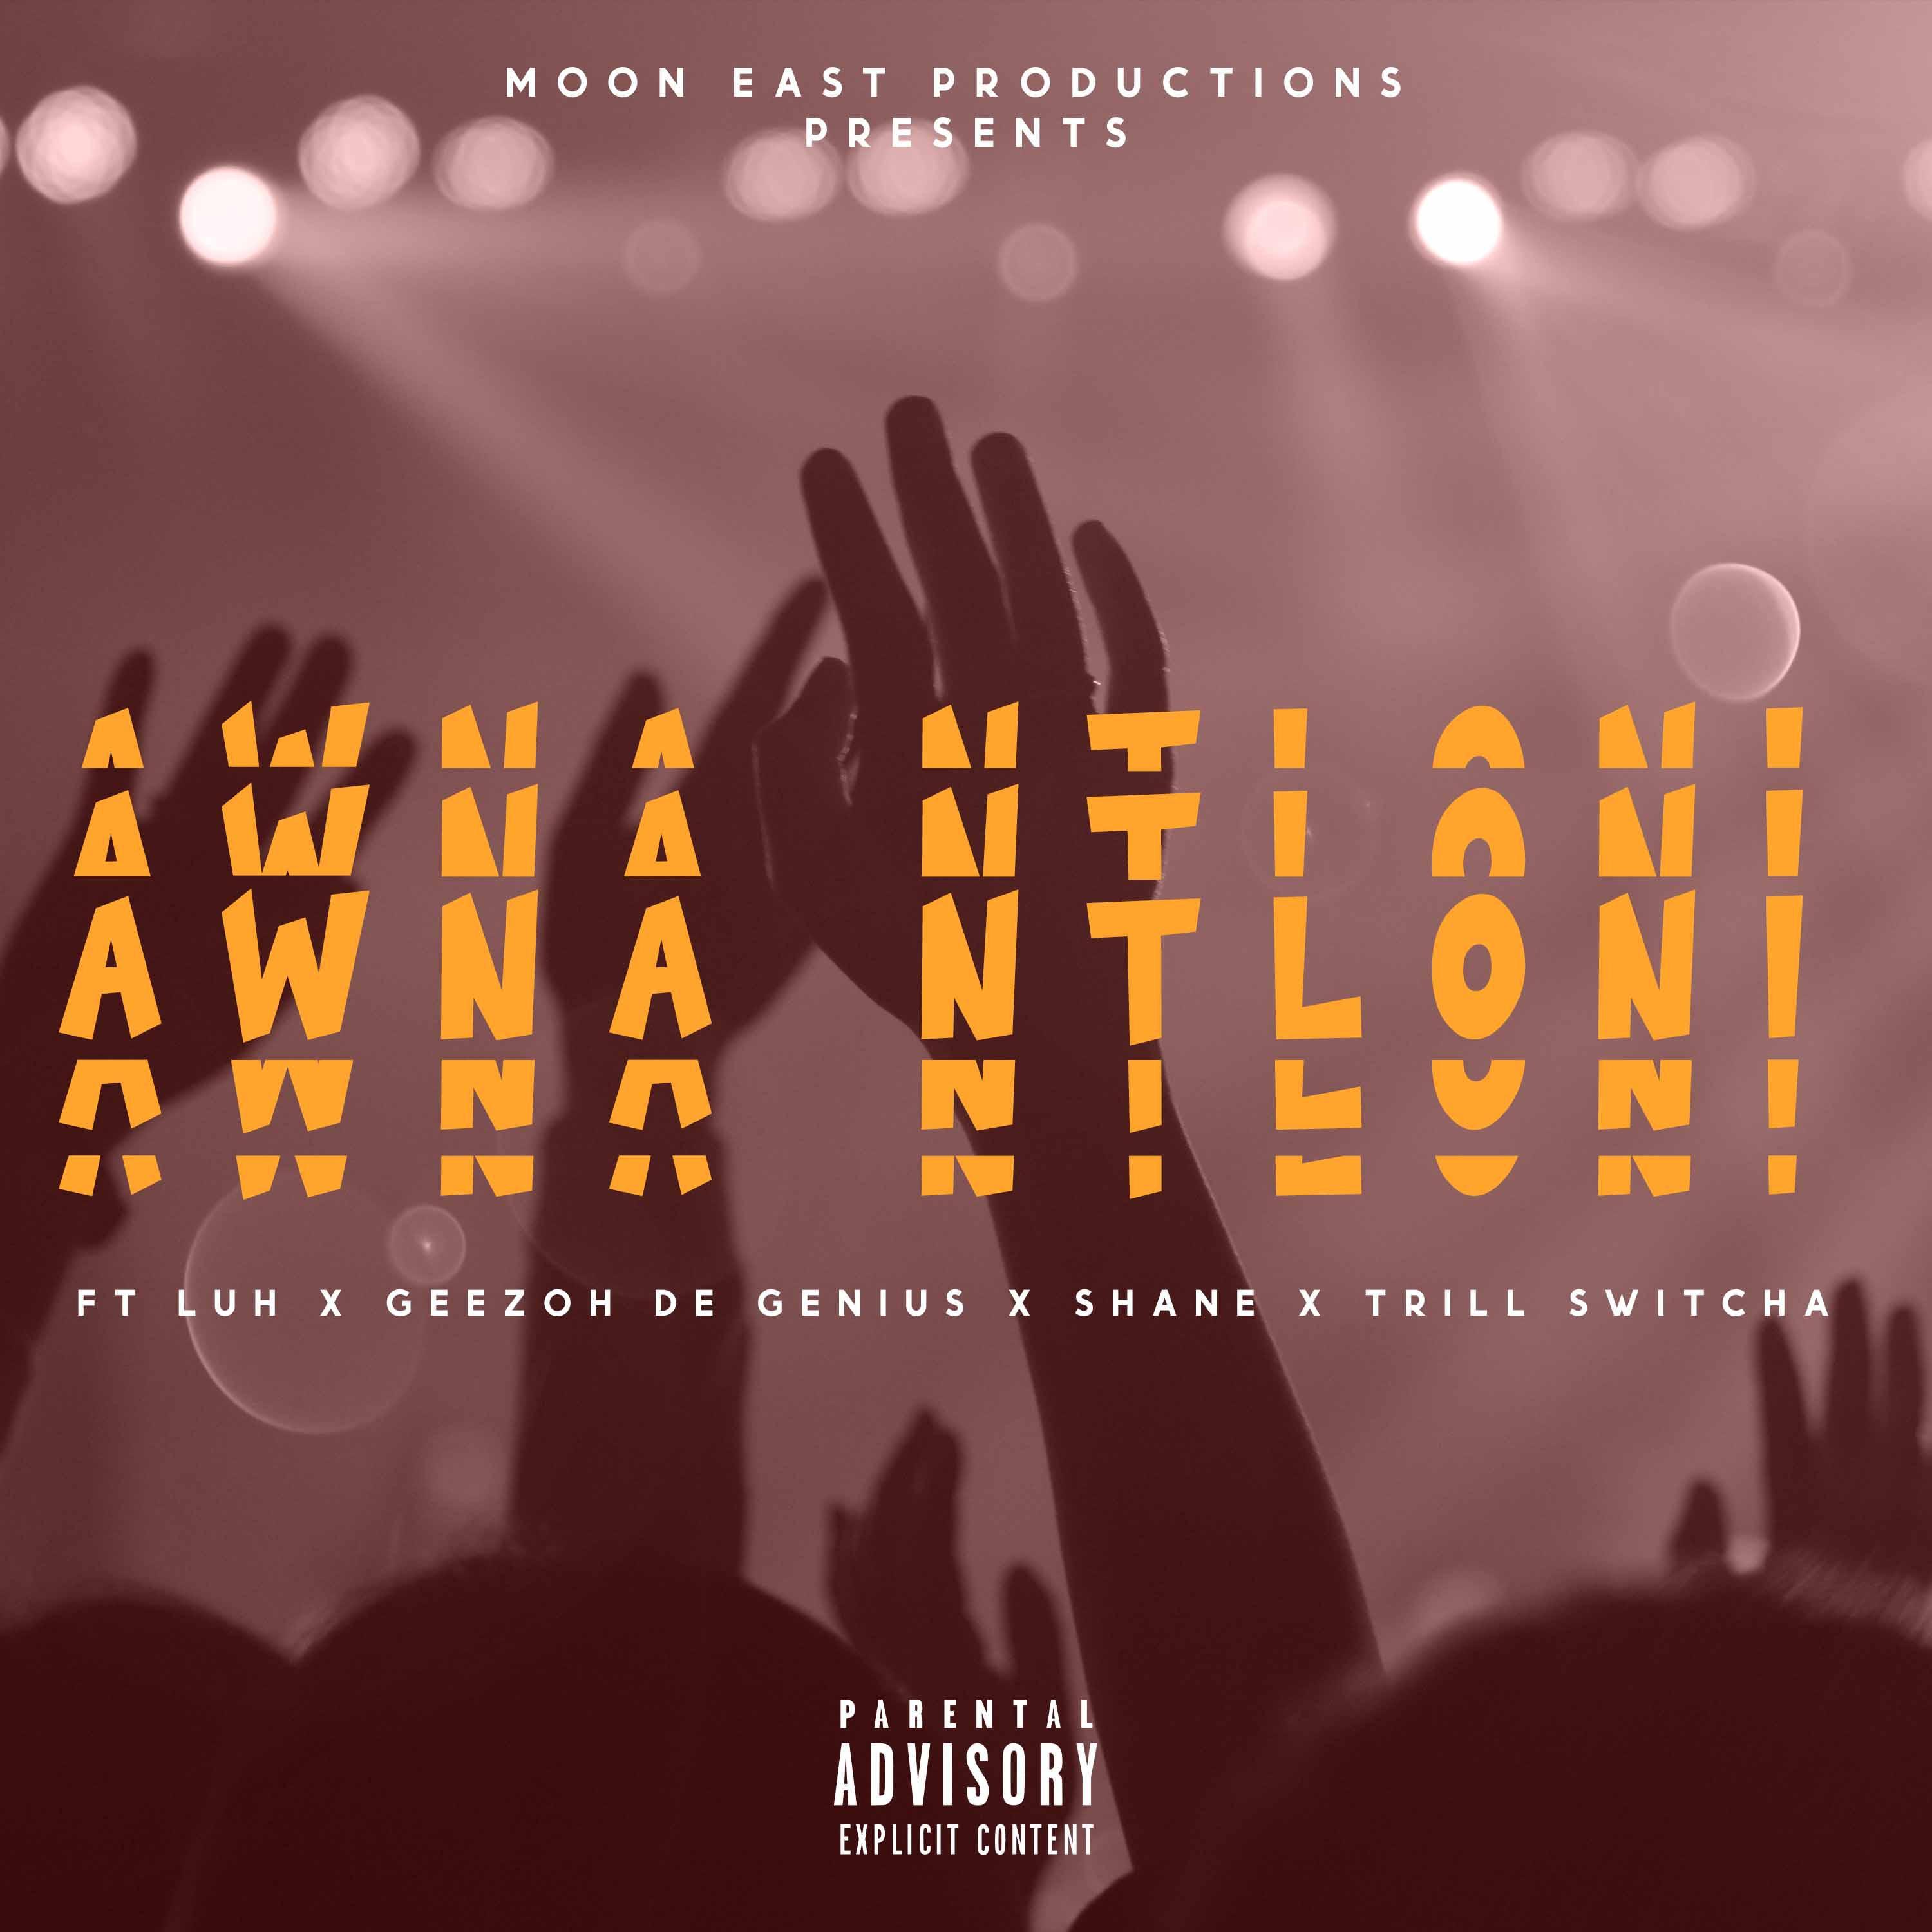 Moon East Productions - Awna Ntloni (feat. Luh, Geezoh De Genius, Shane & Trill Switcha)